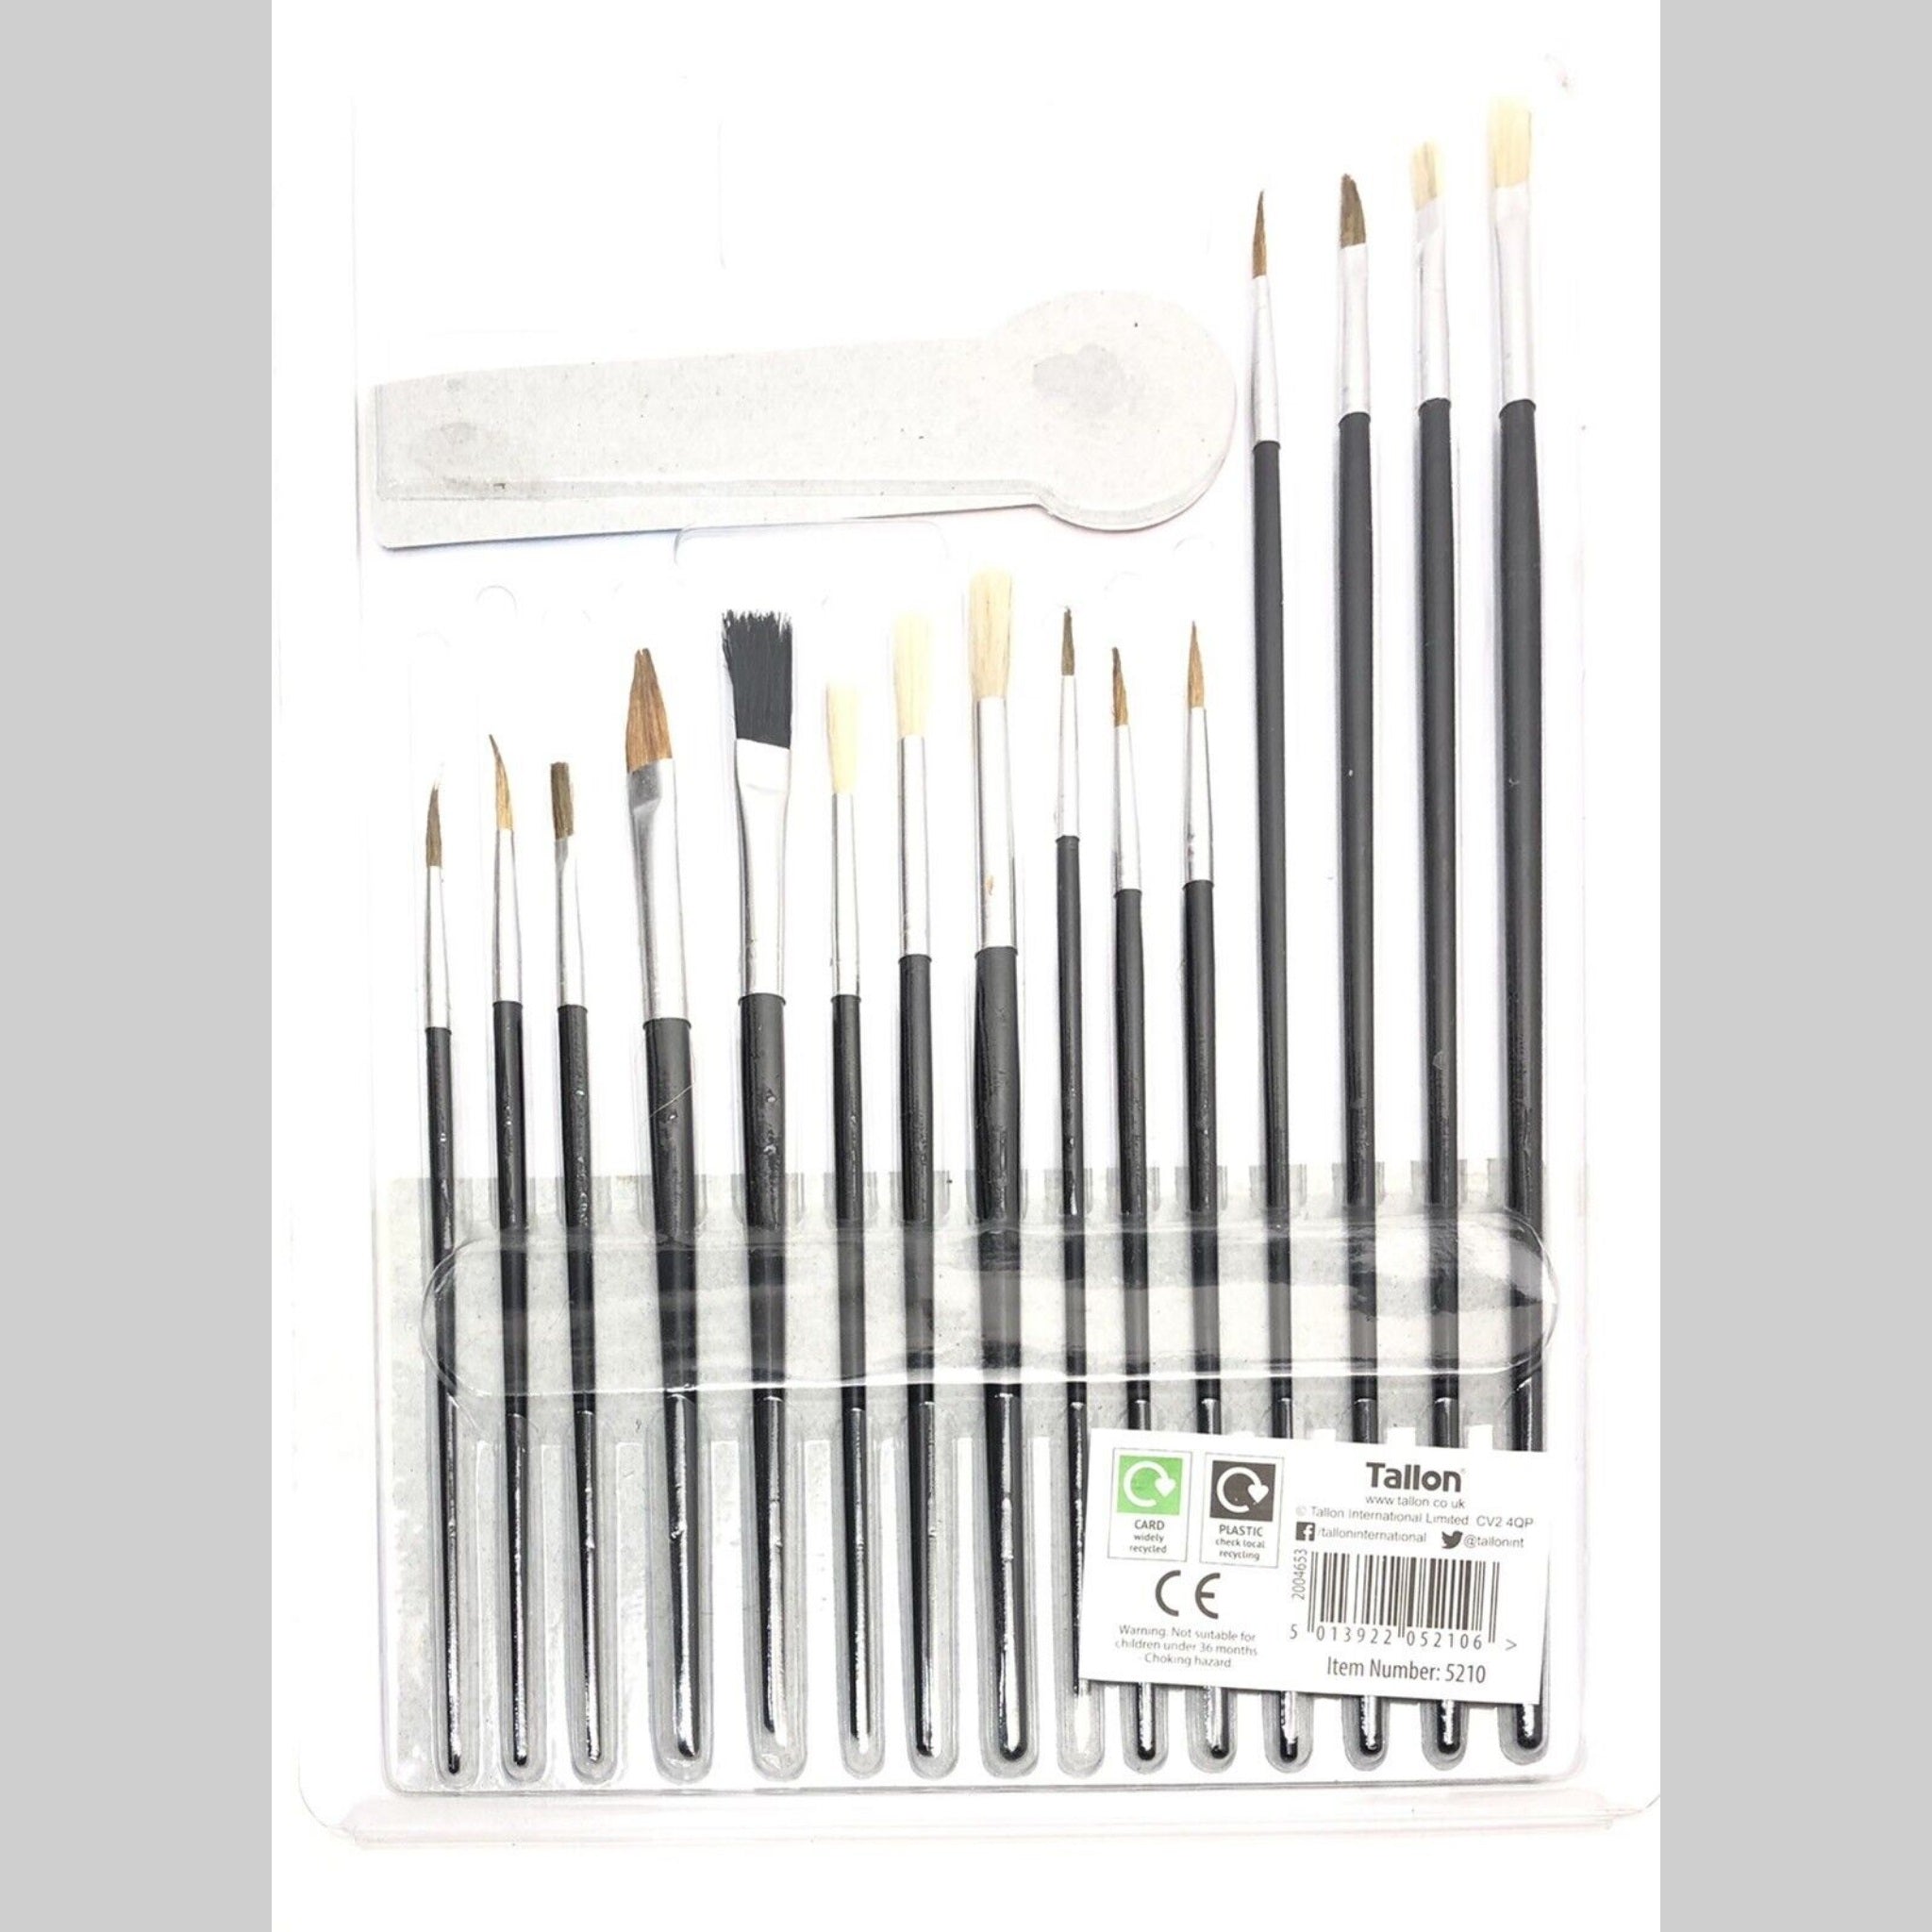 Beclen Harp 15Pc Artist Paint Brushes Set Professional Wooden Handle Assorted Flat & Tipped Different Sizes and Lengths Brushes Kids Adult/ Oil Water Acrylic Paint Brushes